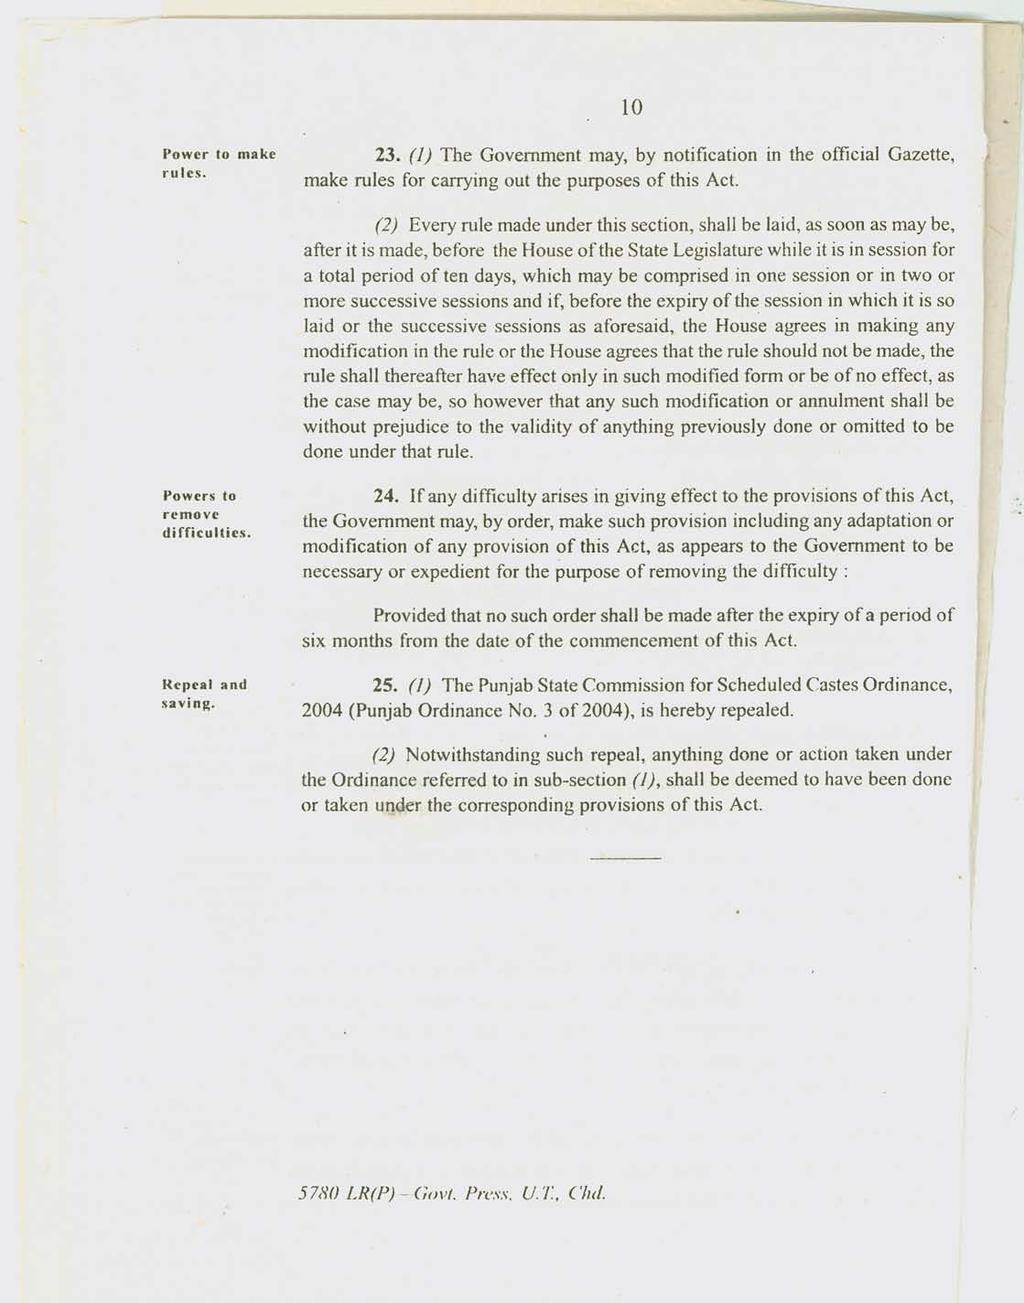 Power rules. to make 10 23. (1) The Government may, by notification in the official Gazette, make rules for carrying out the purposes of this Act.